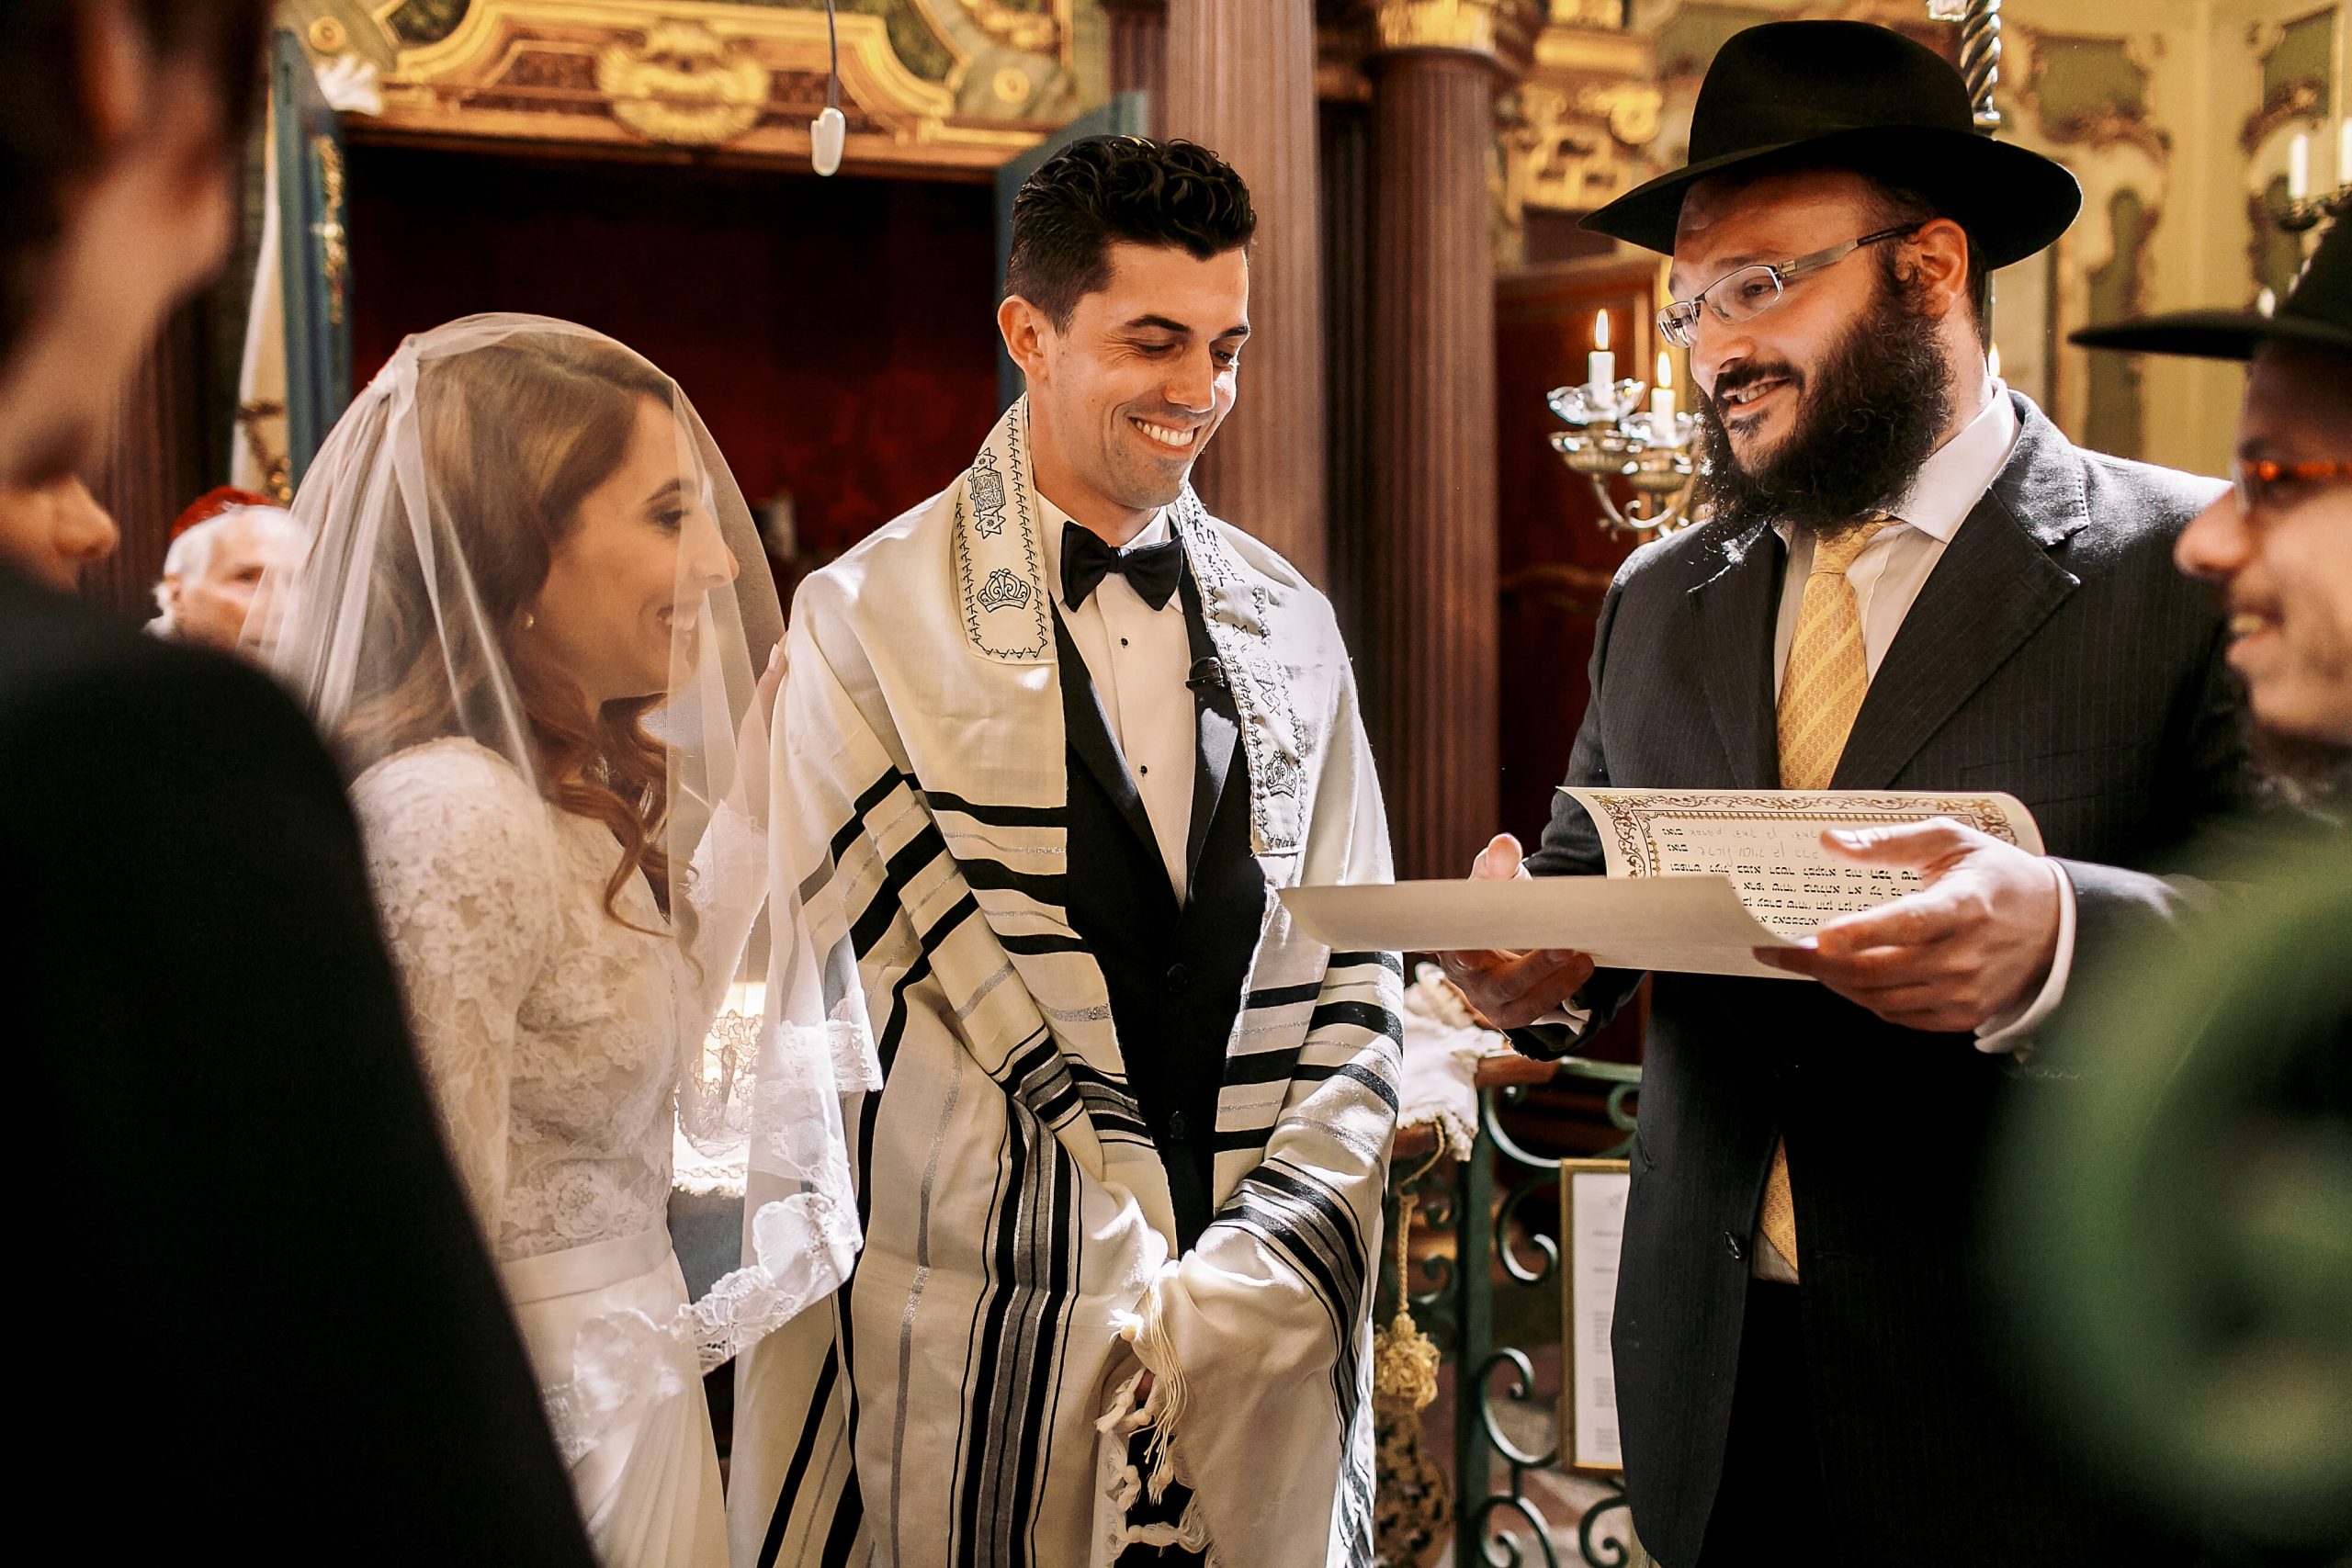 Rabbi Silverman Announces Trends to Anticipate for 2021 Weddings